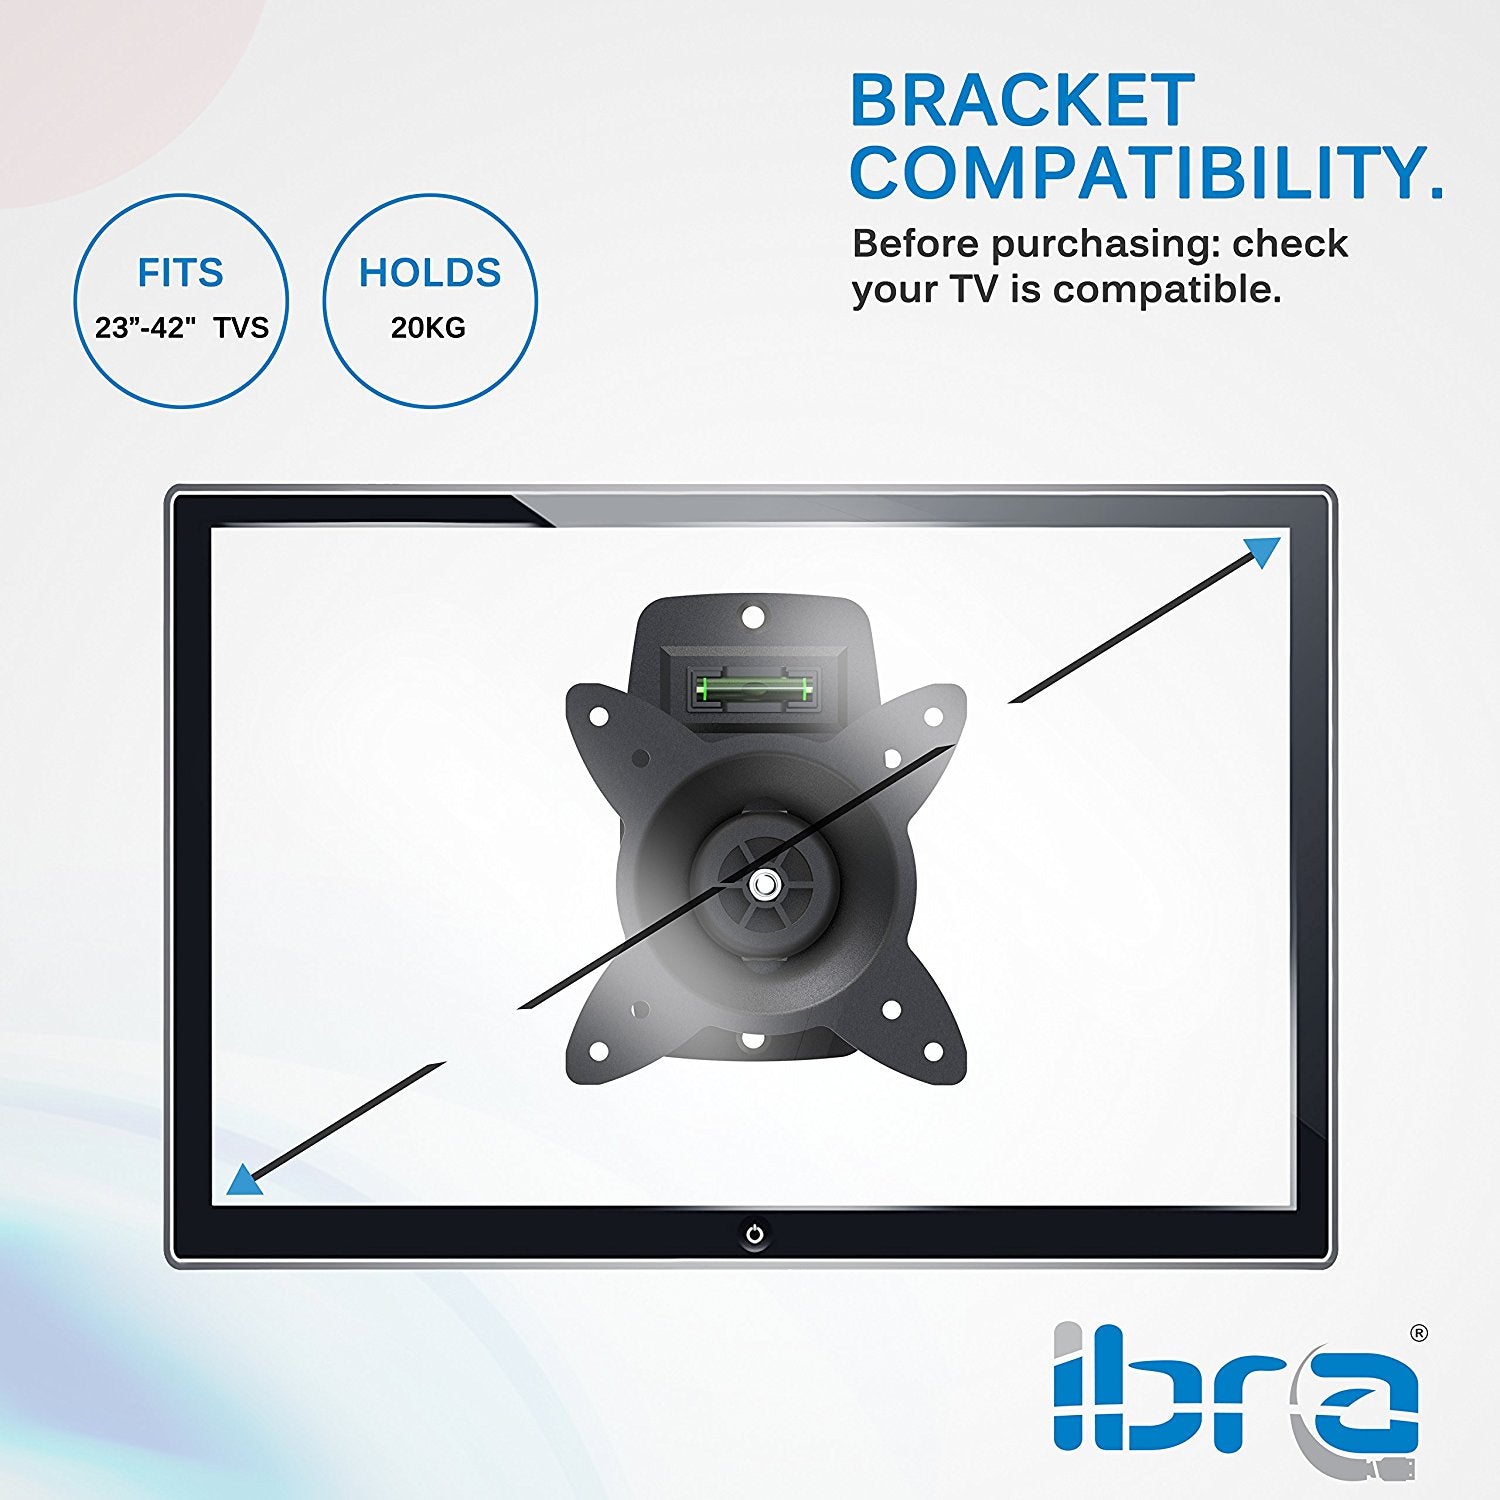 IBRA Flat TV Mount for LED&LCD TV Sizes from 23"~ 42" Tilt and Swivel Mount with Lockable system,cable management with Integrated Spirit Level.